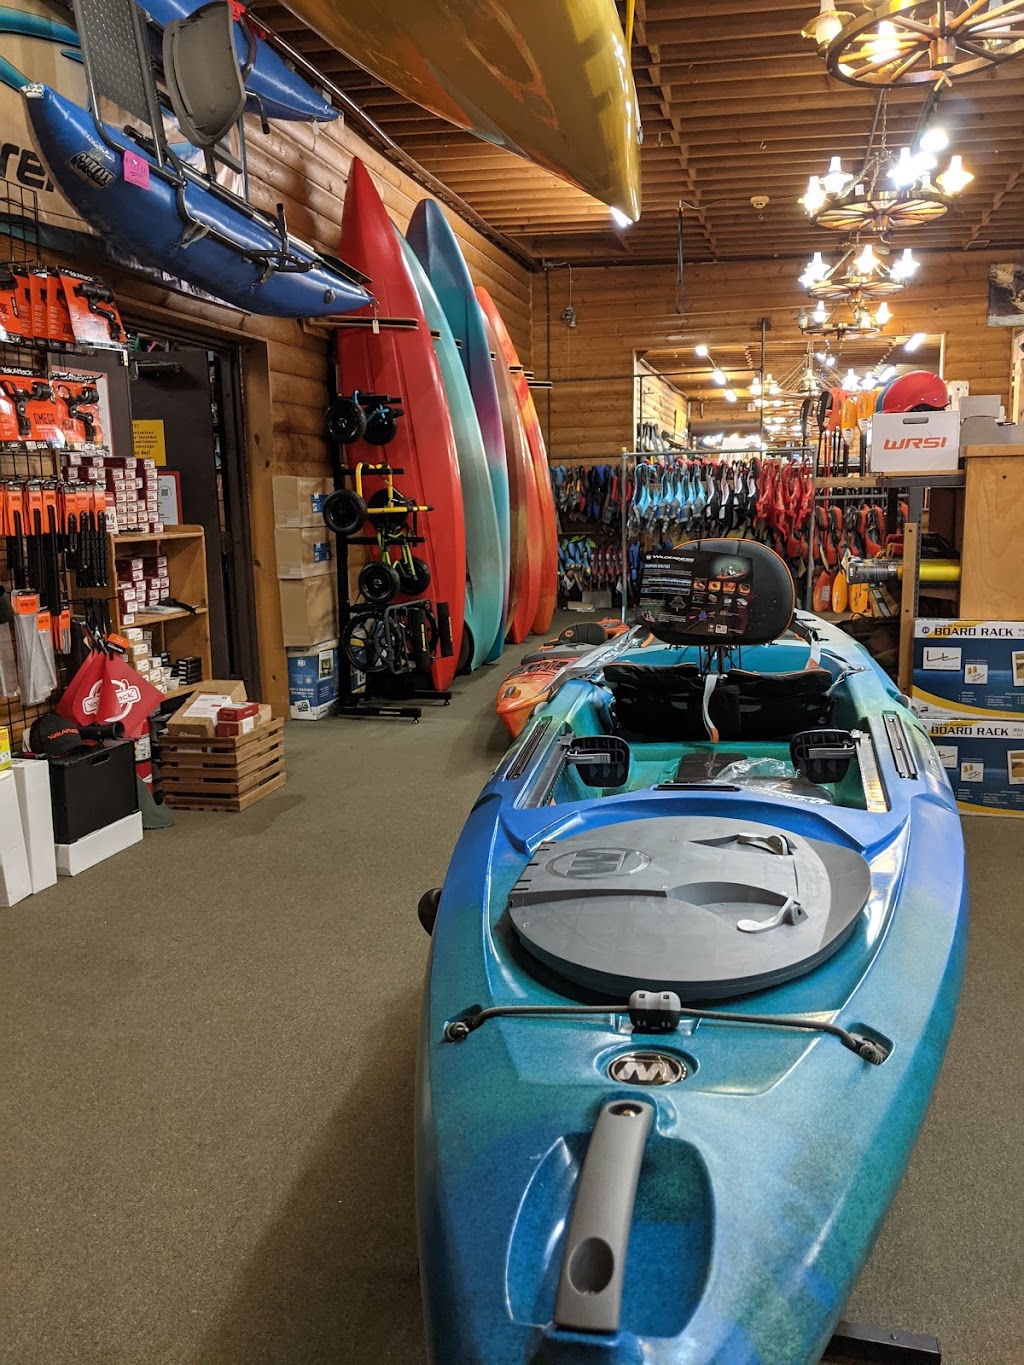 Backpackers Shop Of Ohio Canoe Adventures | 5128 Colorado Ave, Sheffield, OH 44054 | Phone: (440) 934-5345